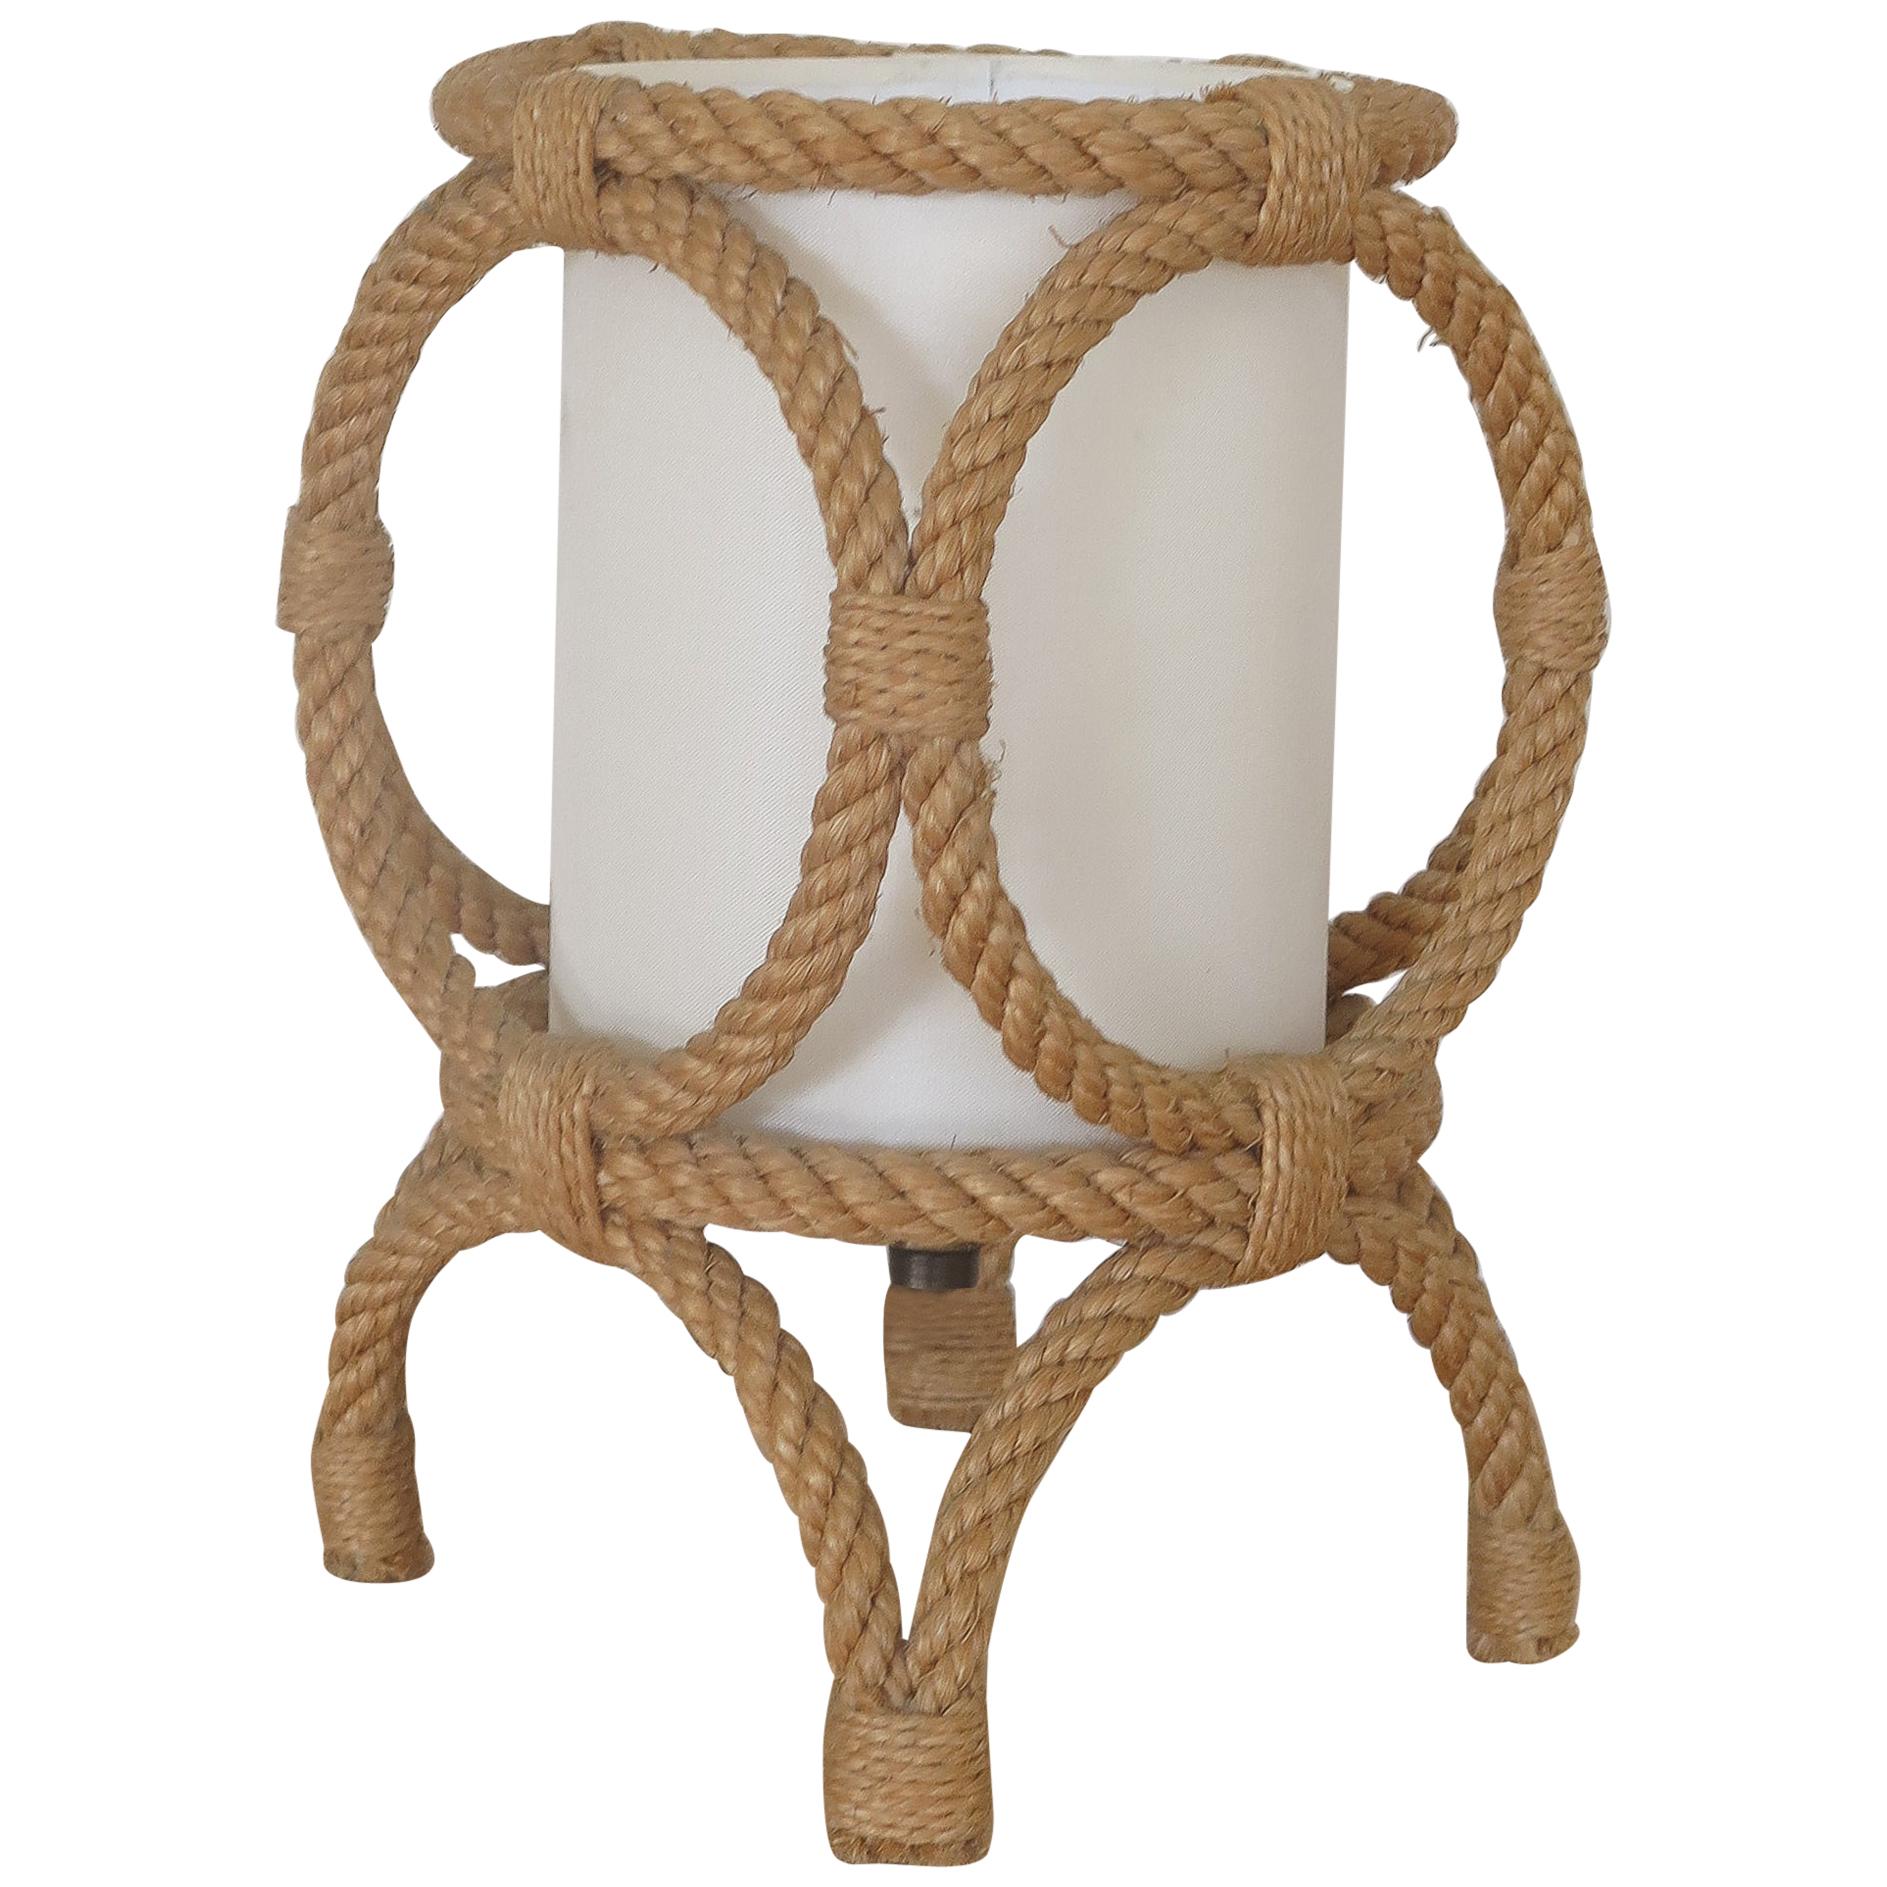 Petite Rope Lantern Table Lamp by Audoux-Minet